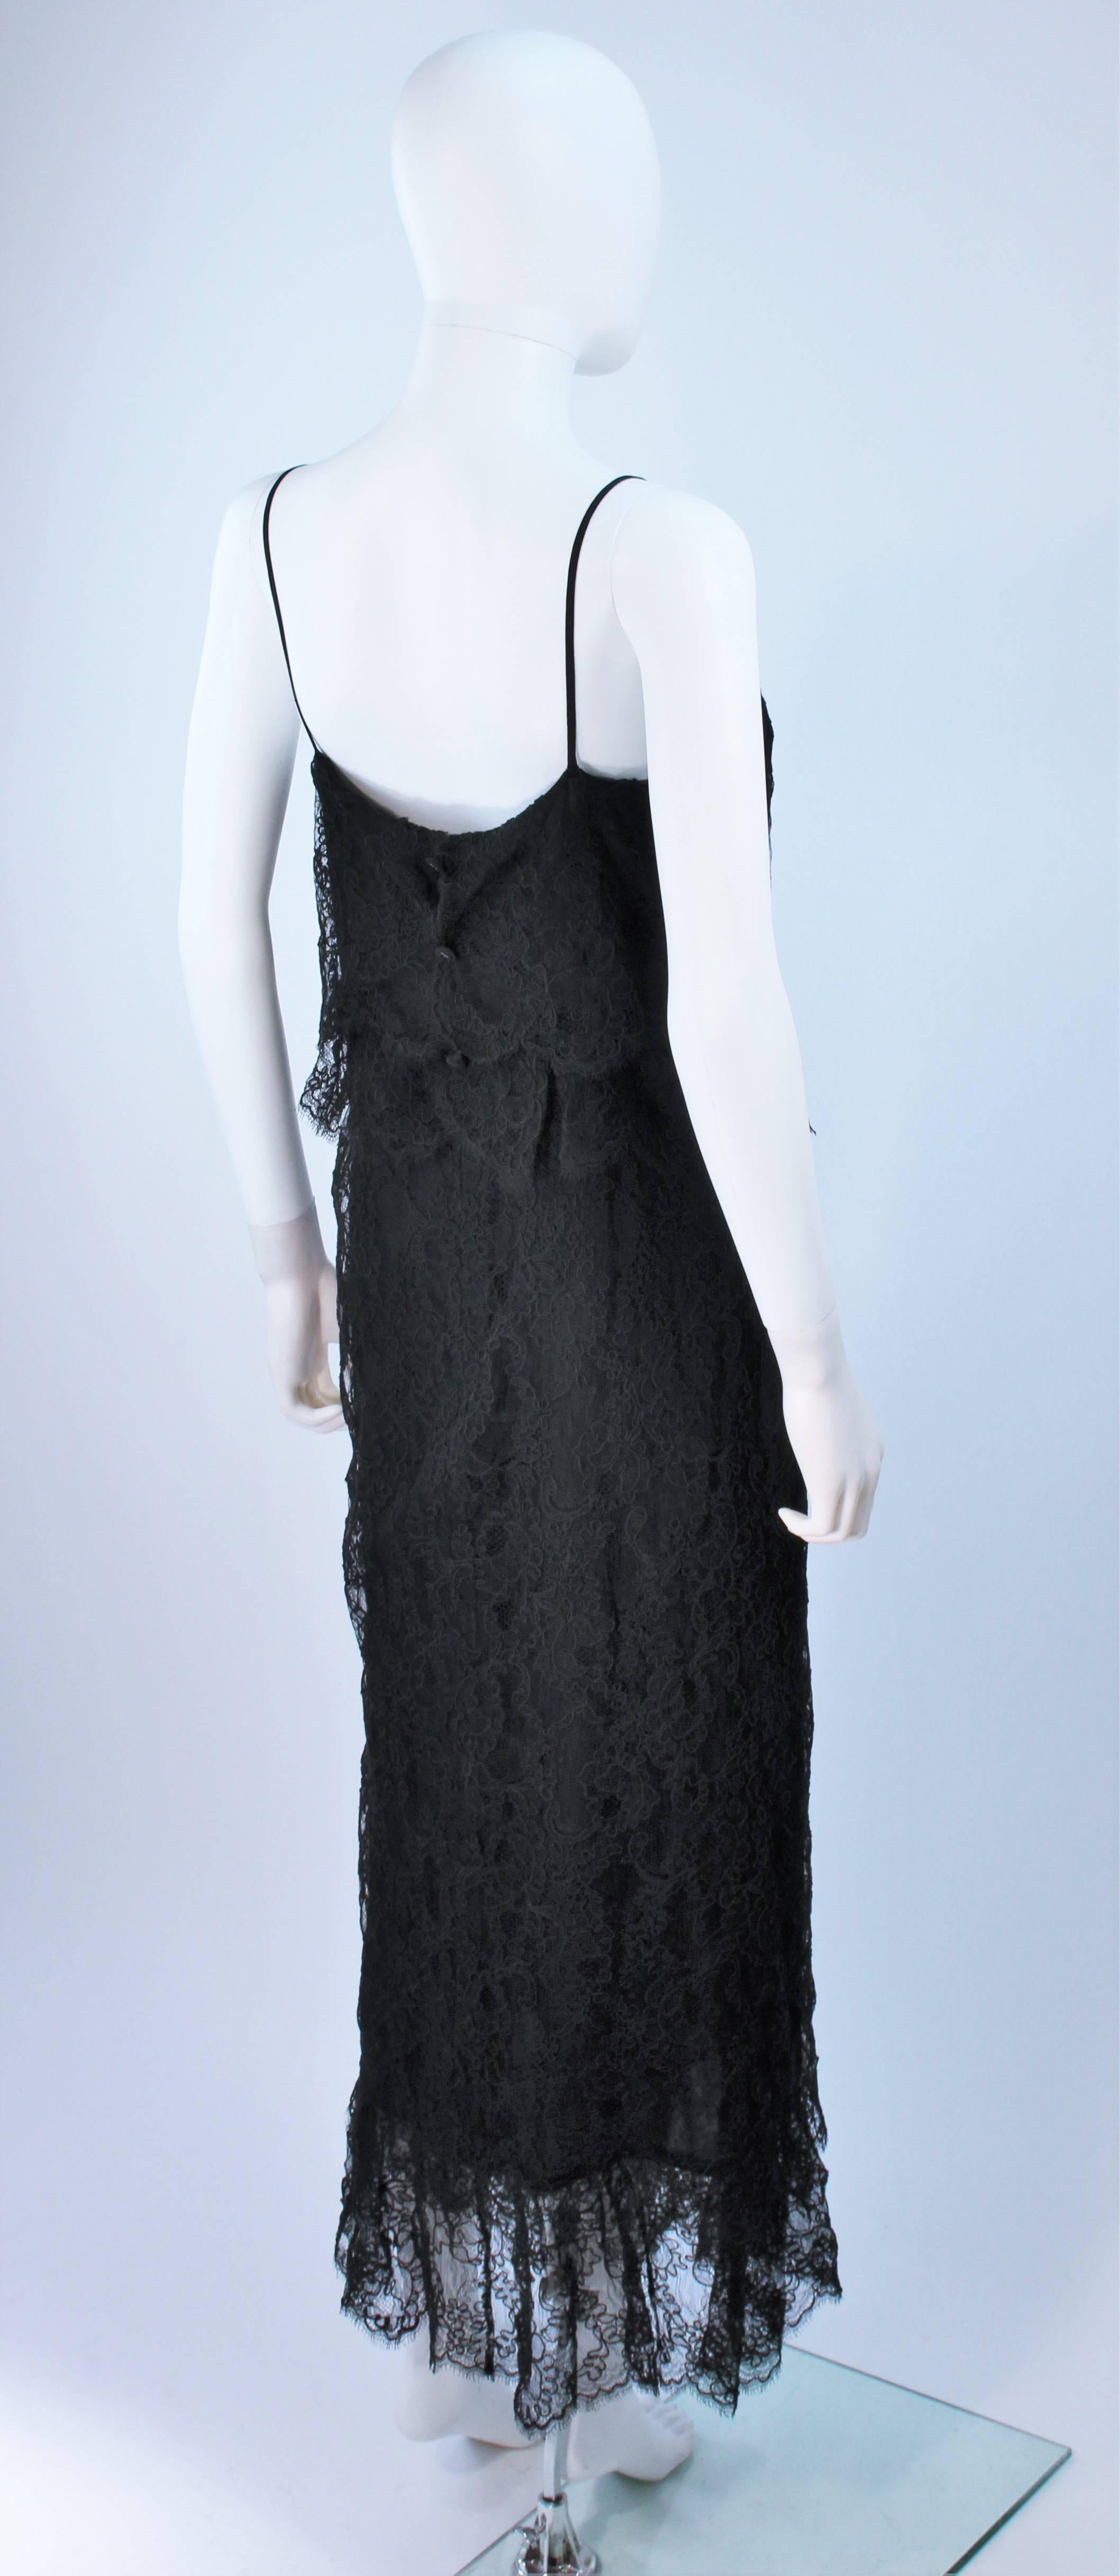 CHANEL Black Tiered Lace Dress Size 10 3